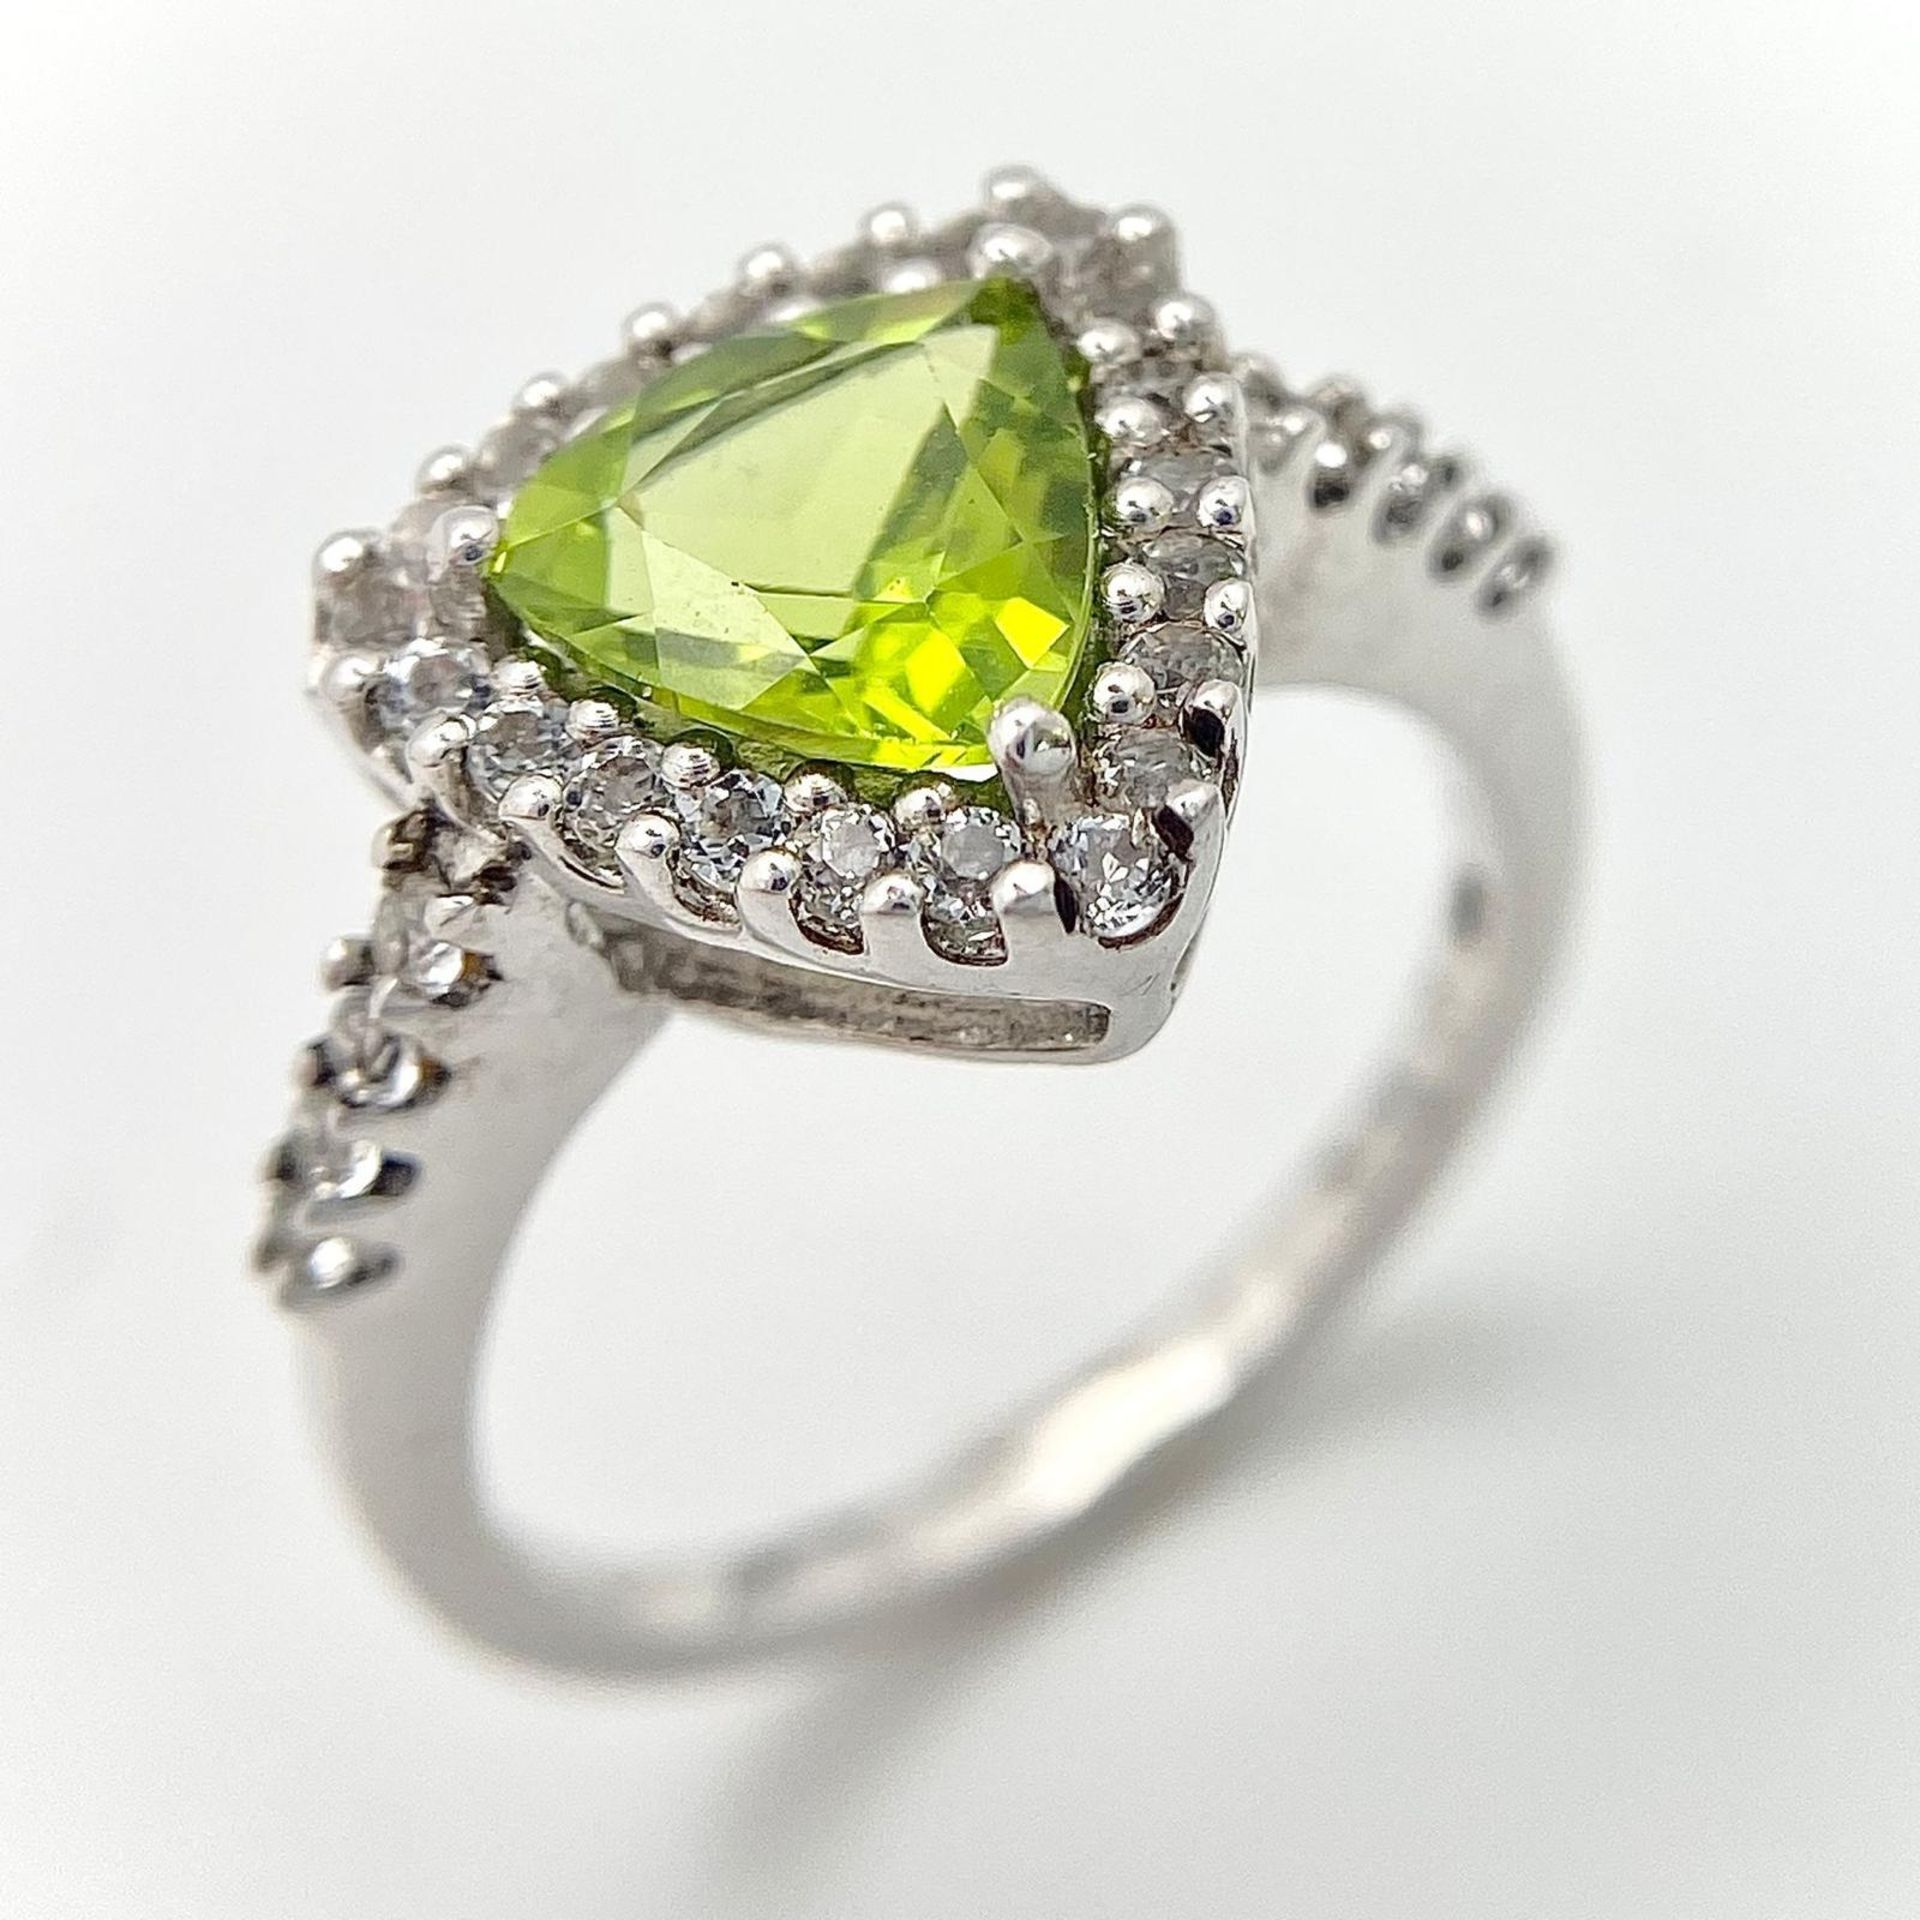 Three 925 Sterling Silver Gemstone Rings: Amethyst - Size P, Peridot - Size N and Ruby - Size R. - Image 4 of 10